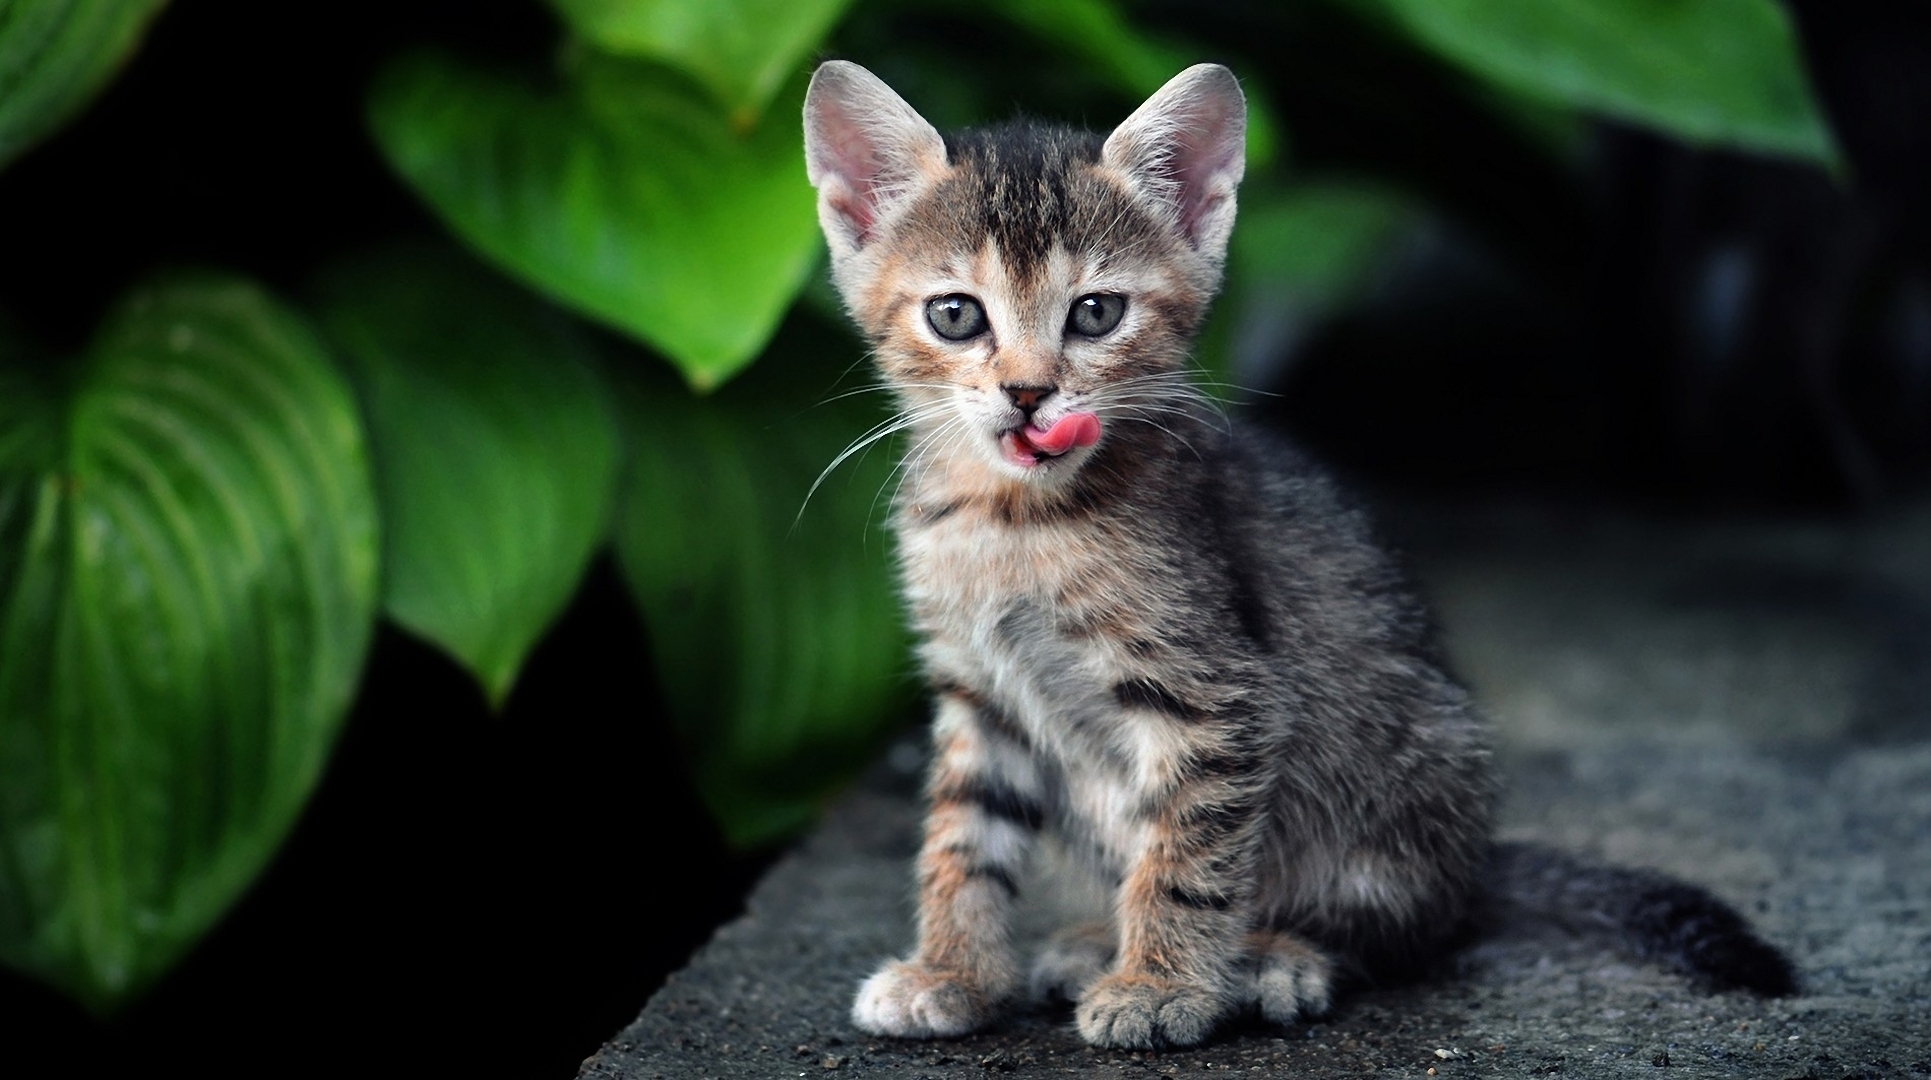 97246 download wallpaper animals, grass, leaves, sit, kitty, kitten screensavers and pictures for free